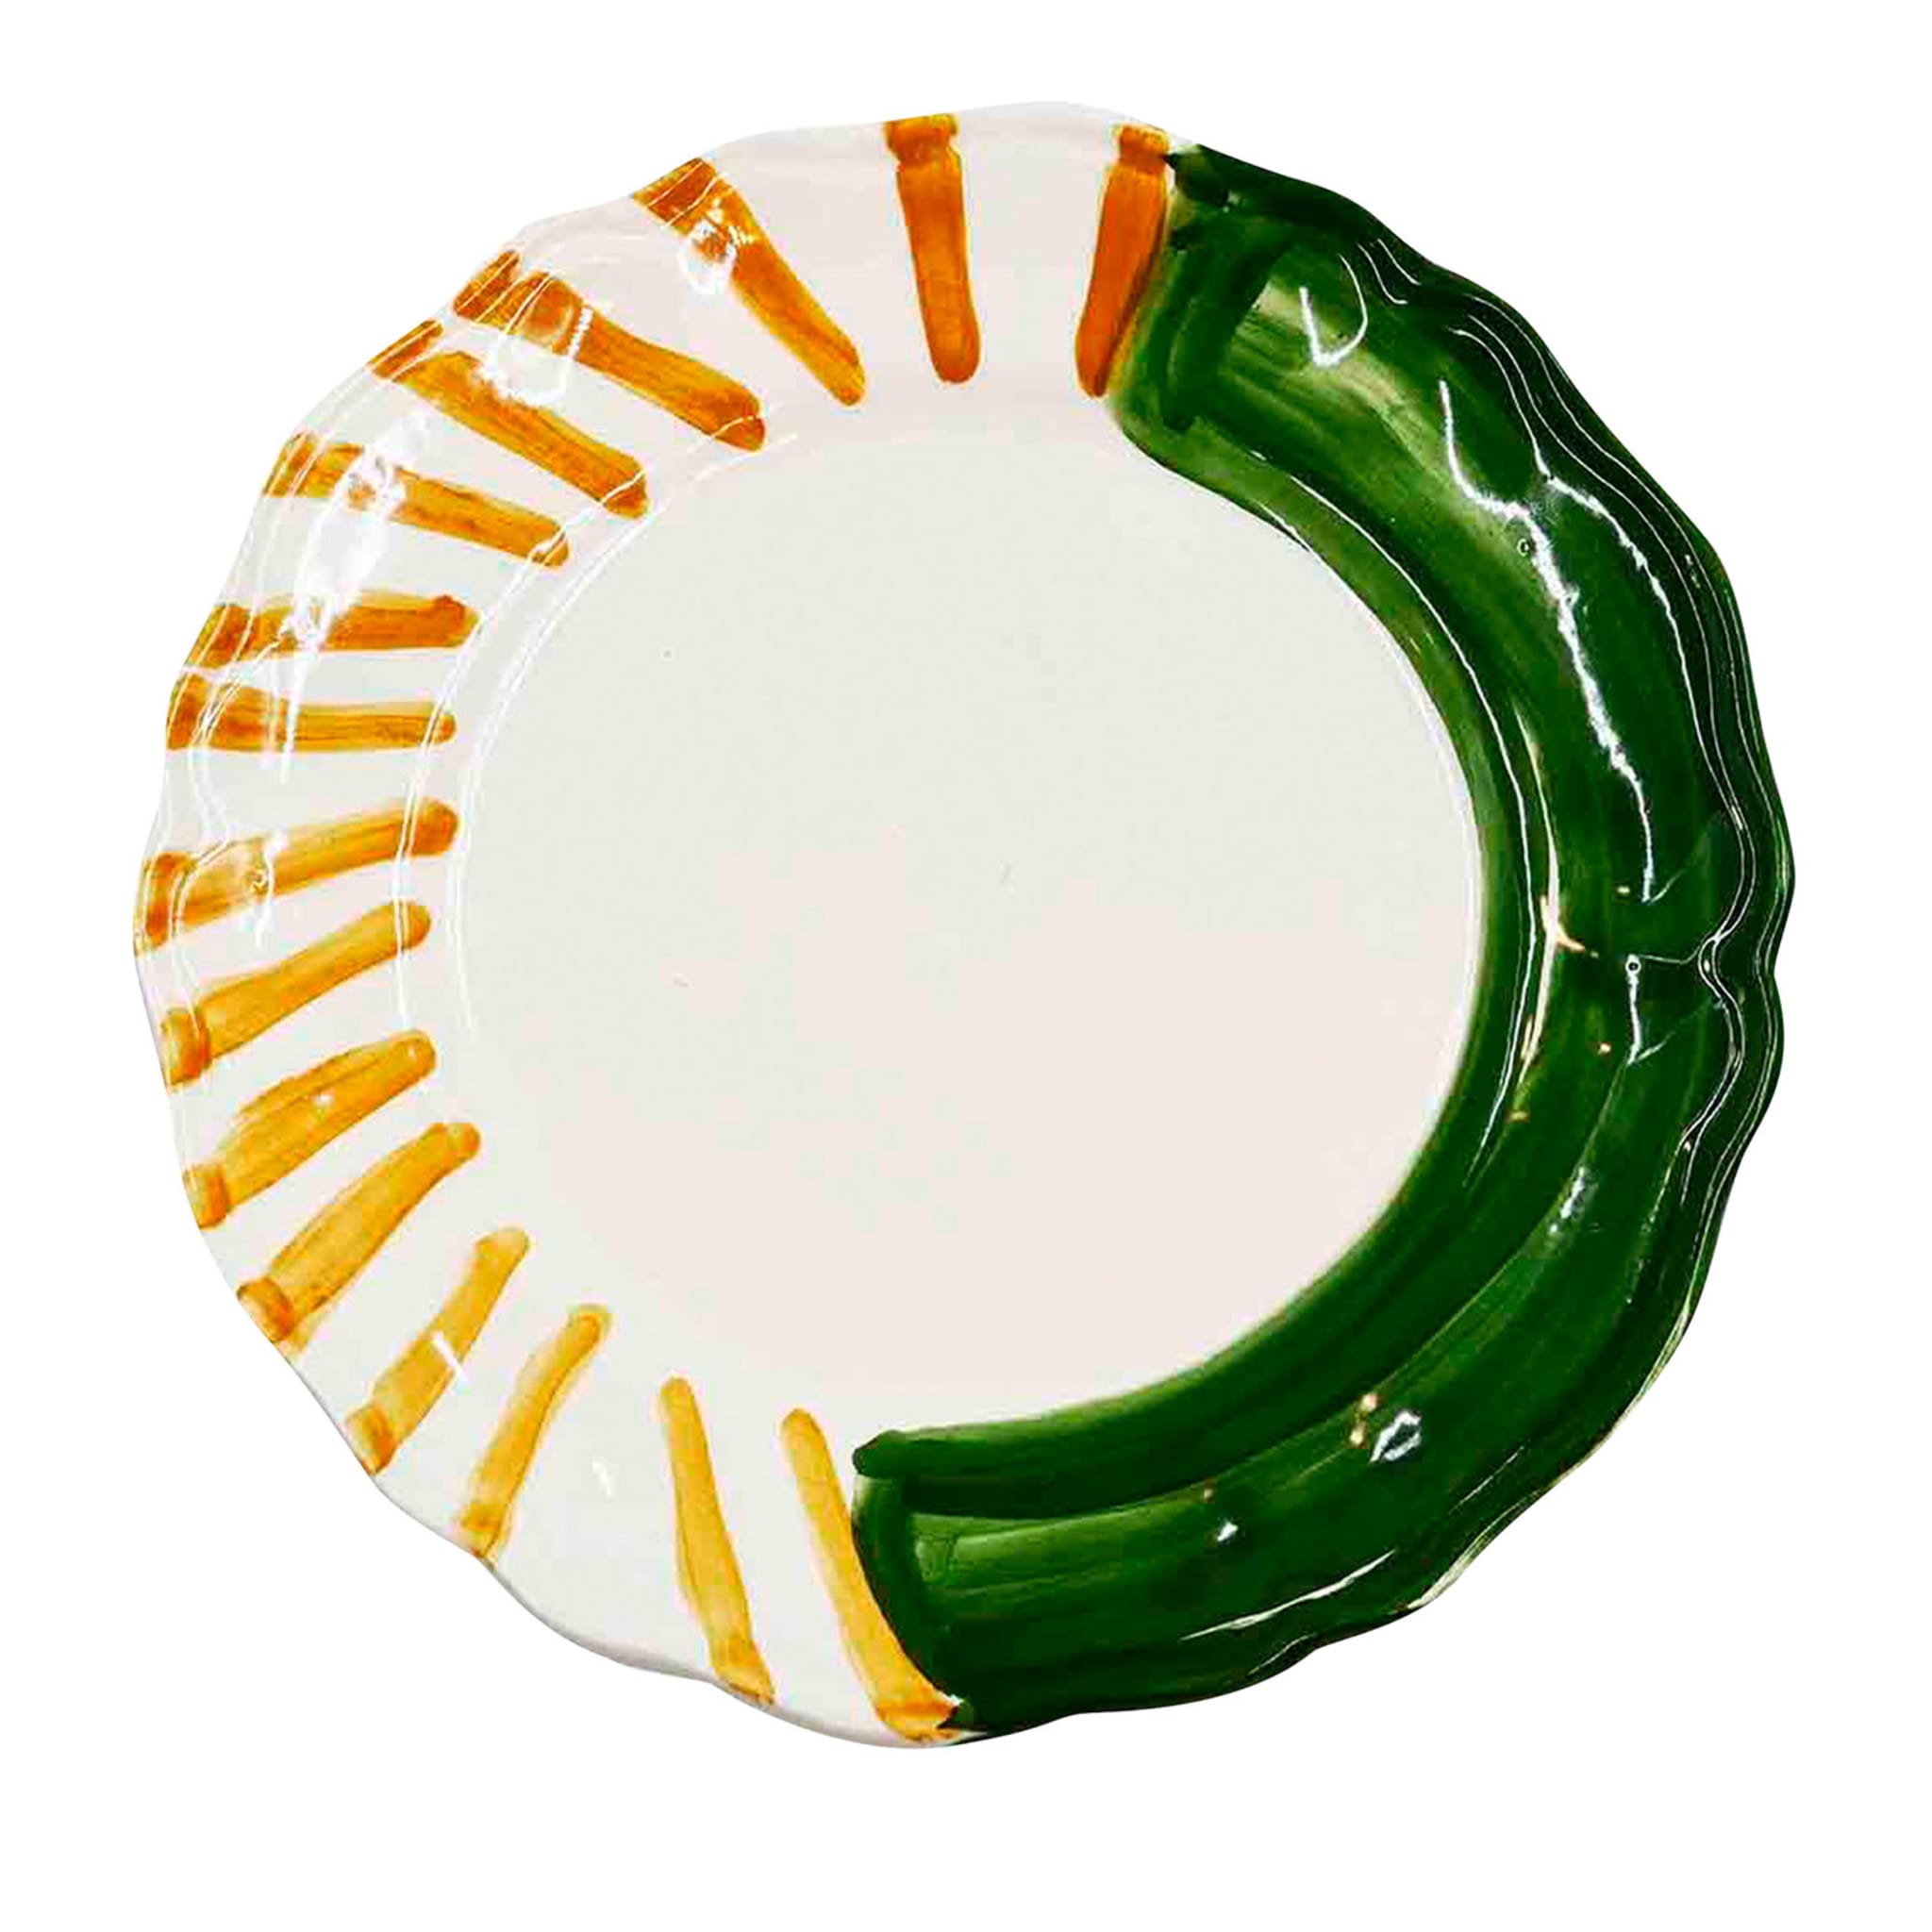 Handcrafted Ceramic Plate